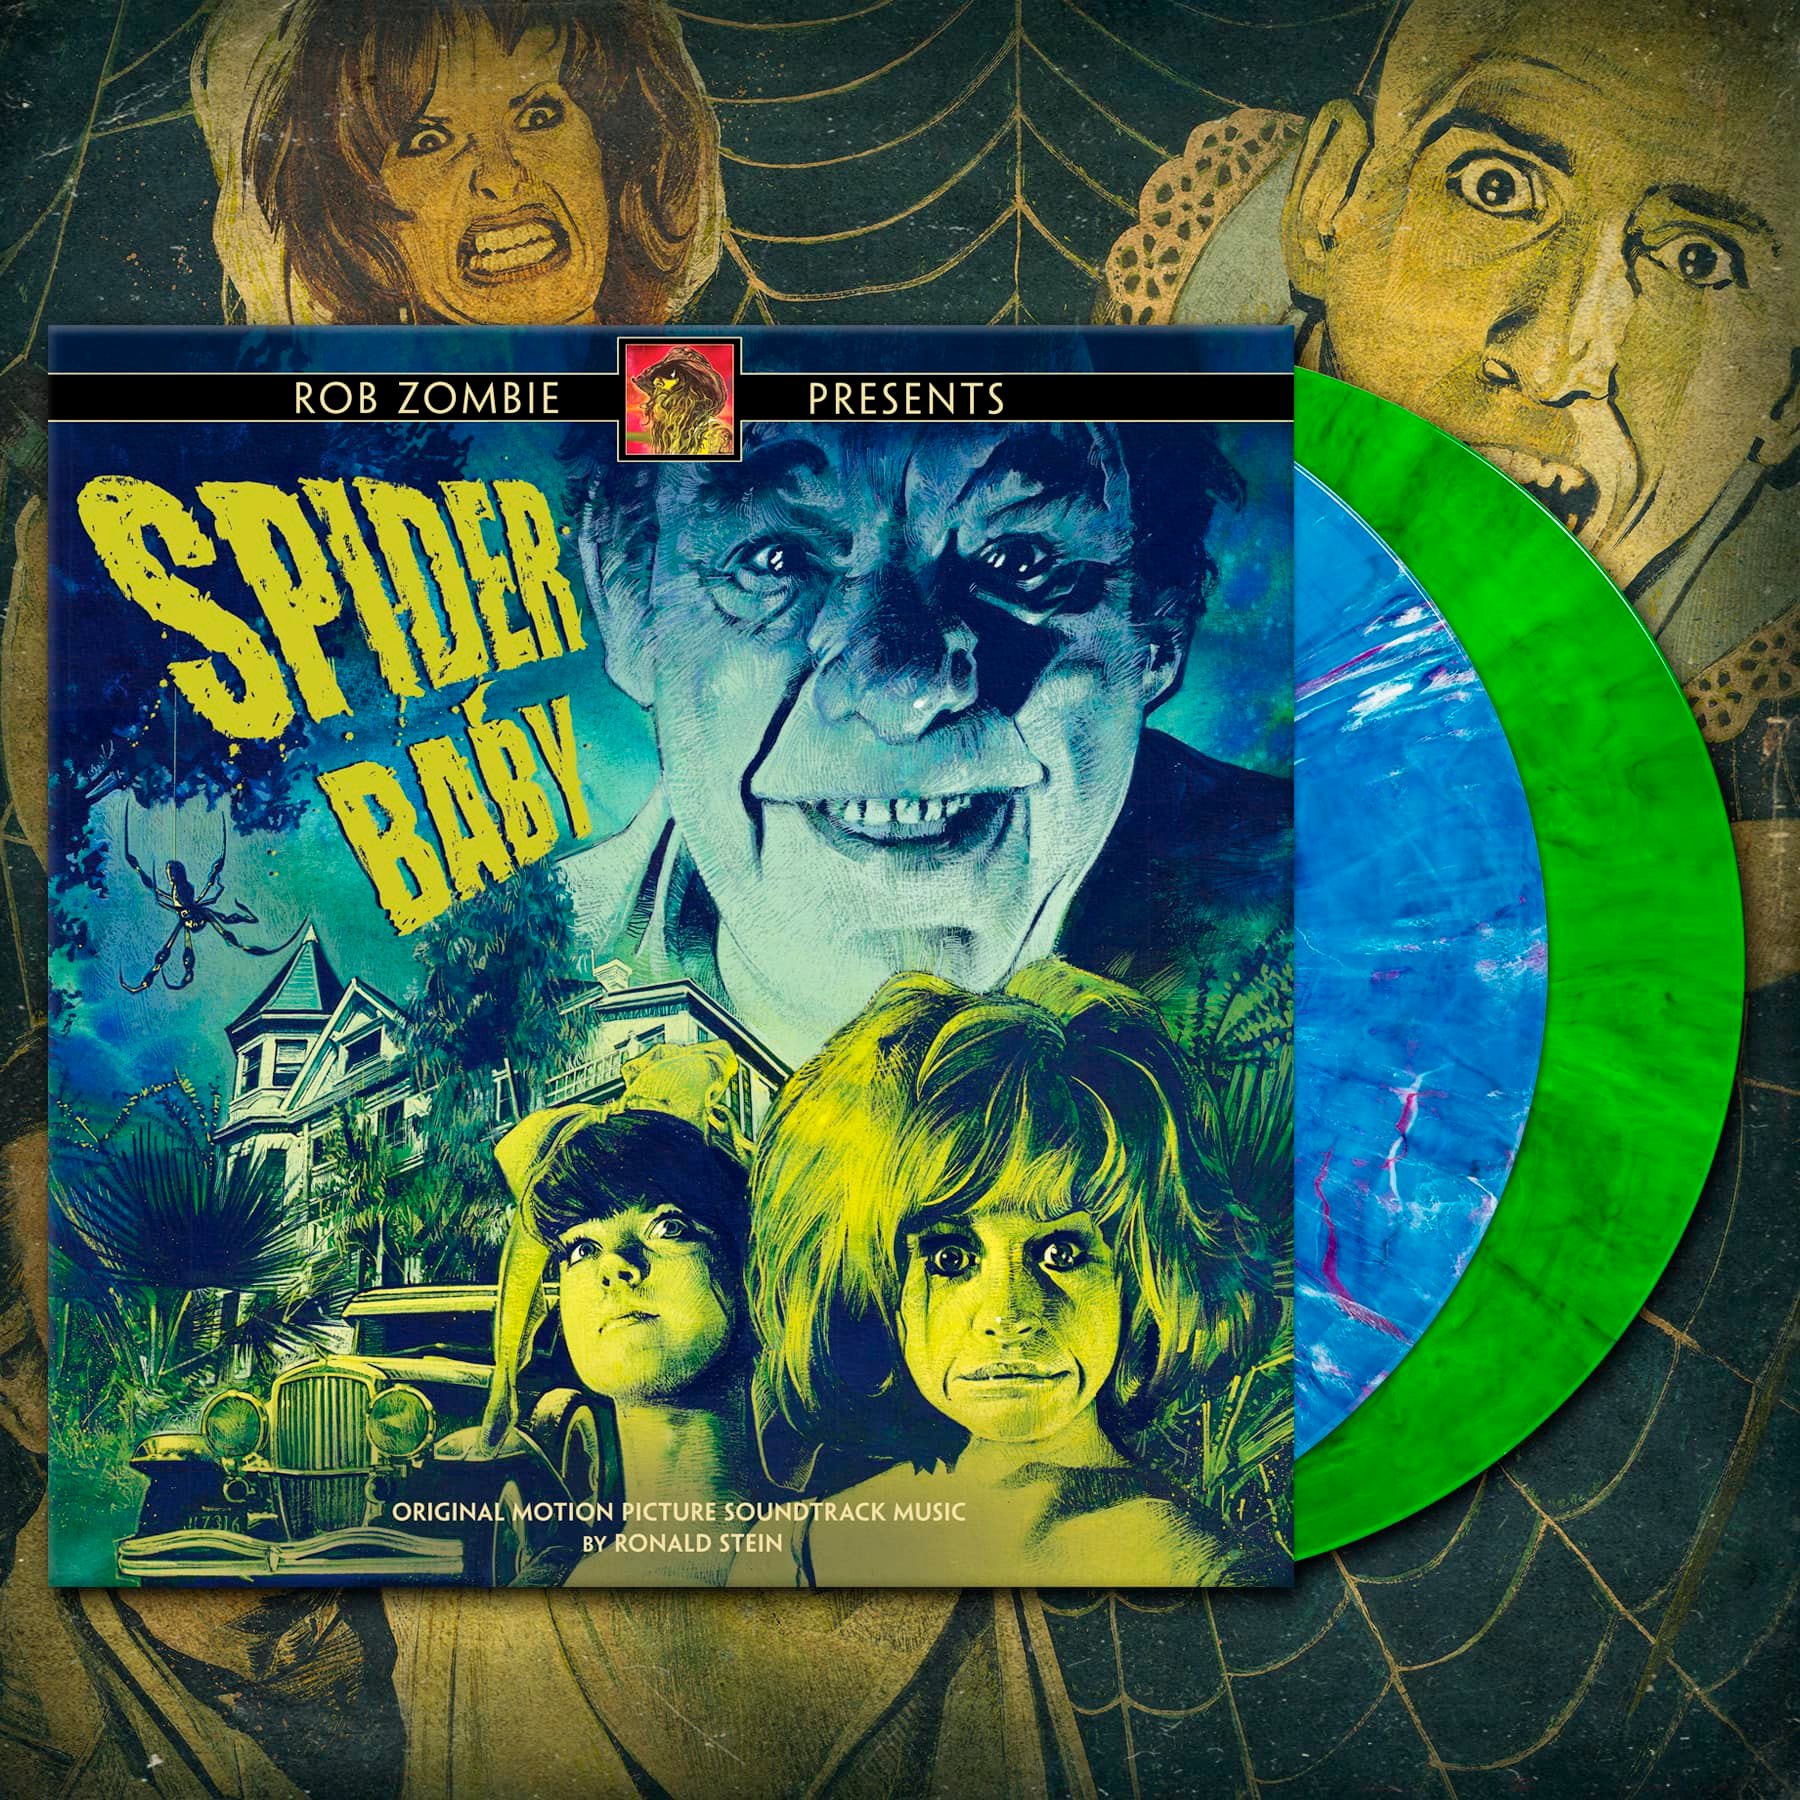 "ROB ZOMBIE PRESENTS SPIDER BABY" Original Motion Picture Soundtrack